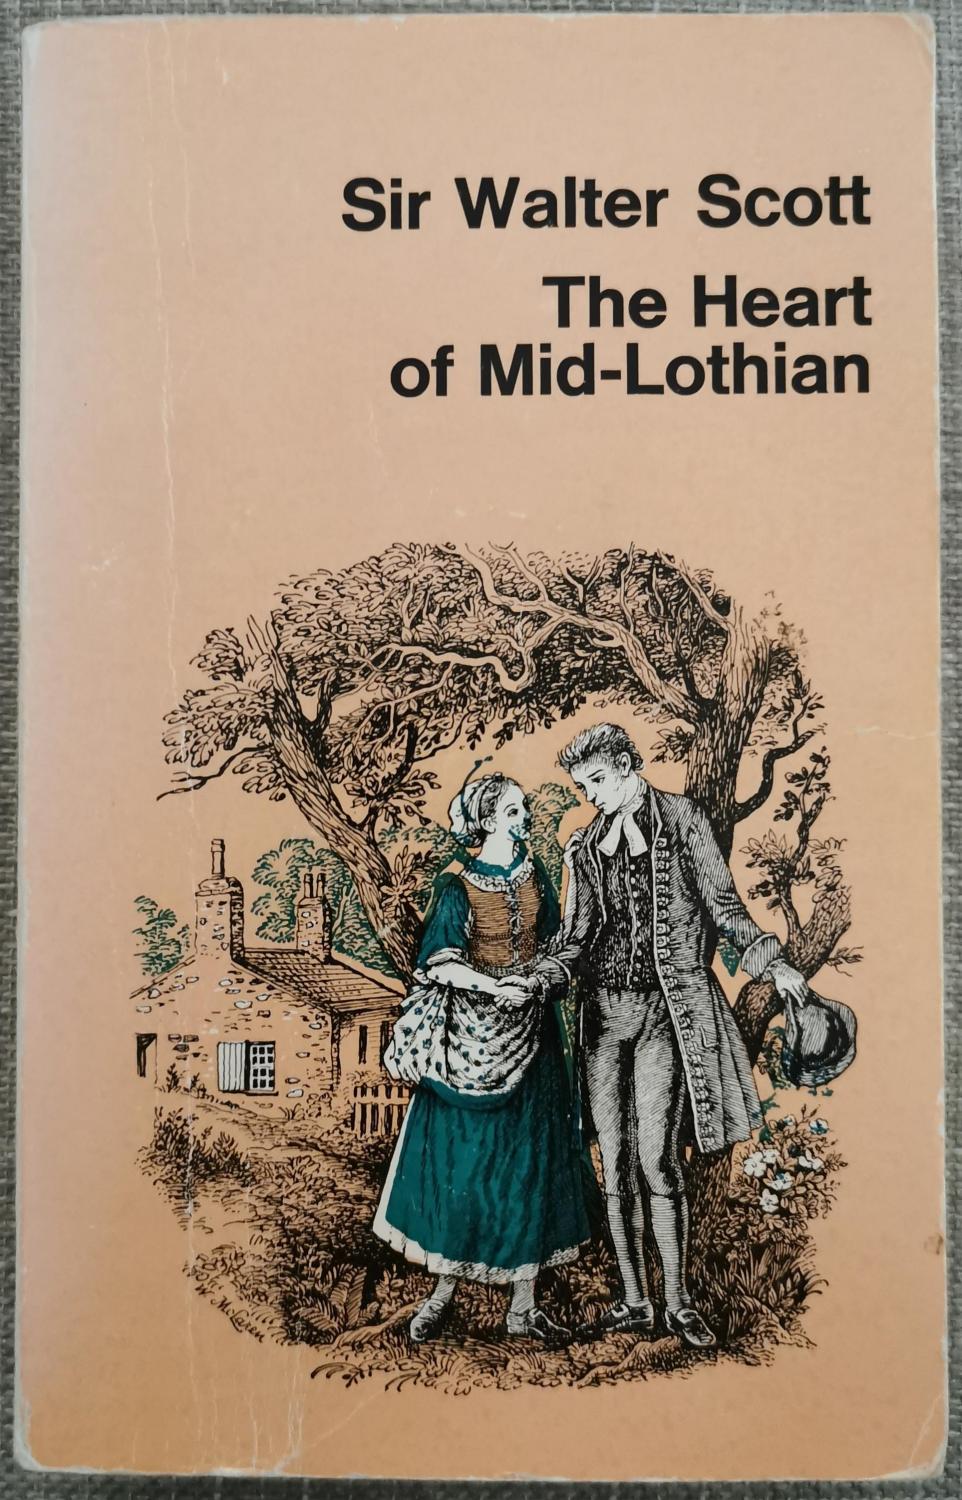 The Heart of Mid-Lothian by Sir Walter Scott